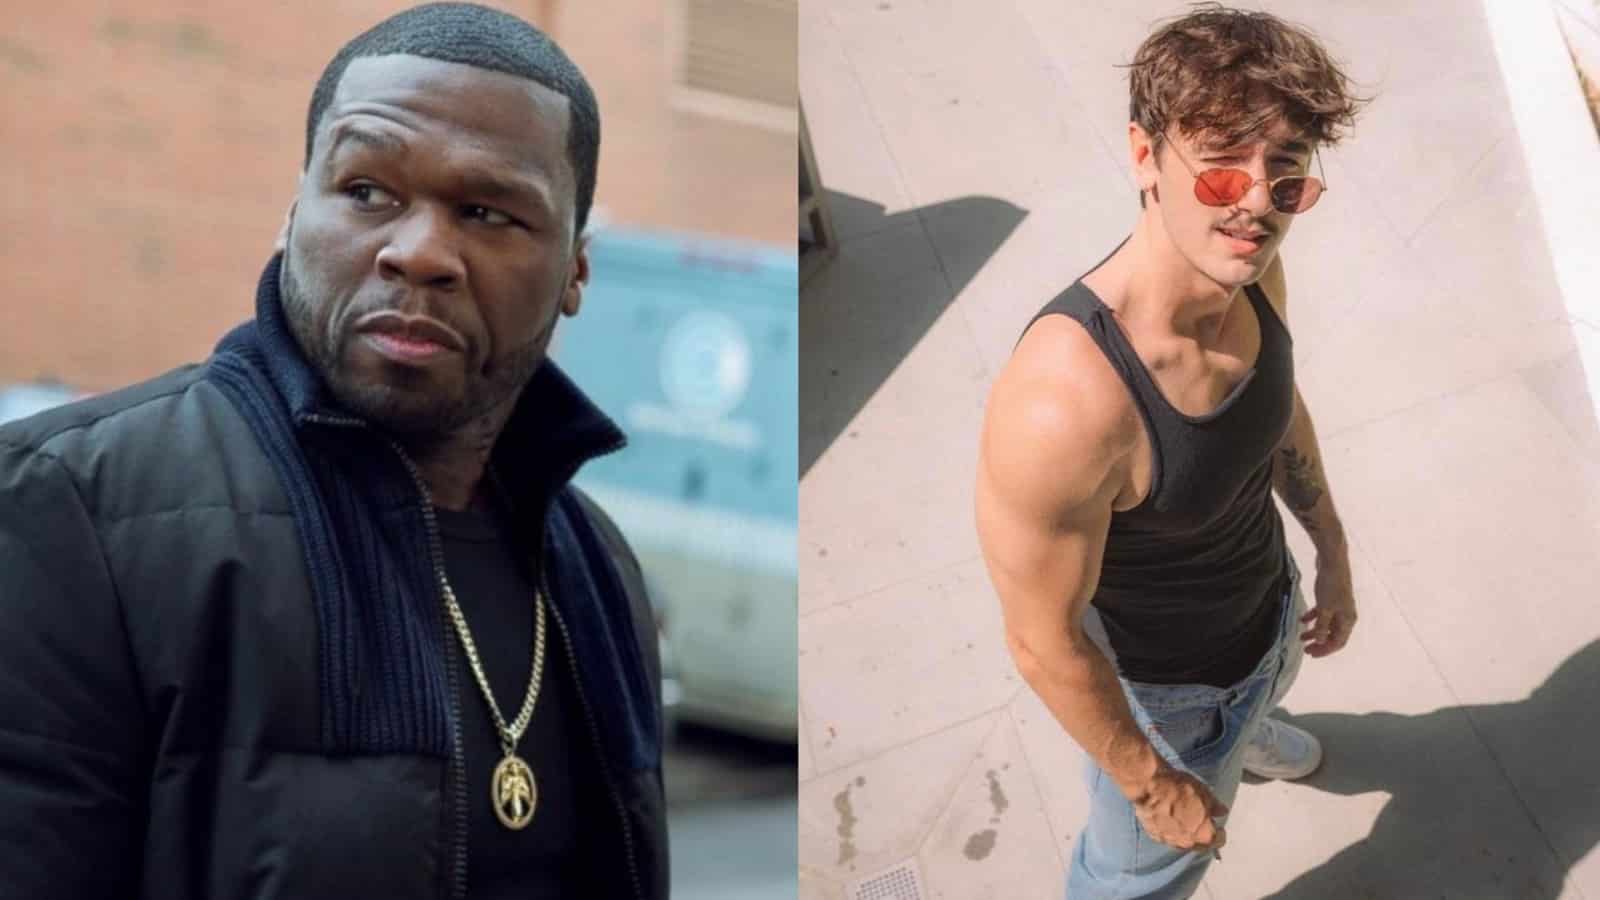 50 Cent joins Bryce Hall in Skill House